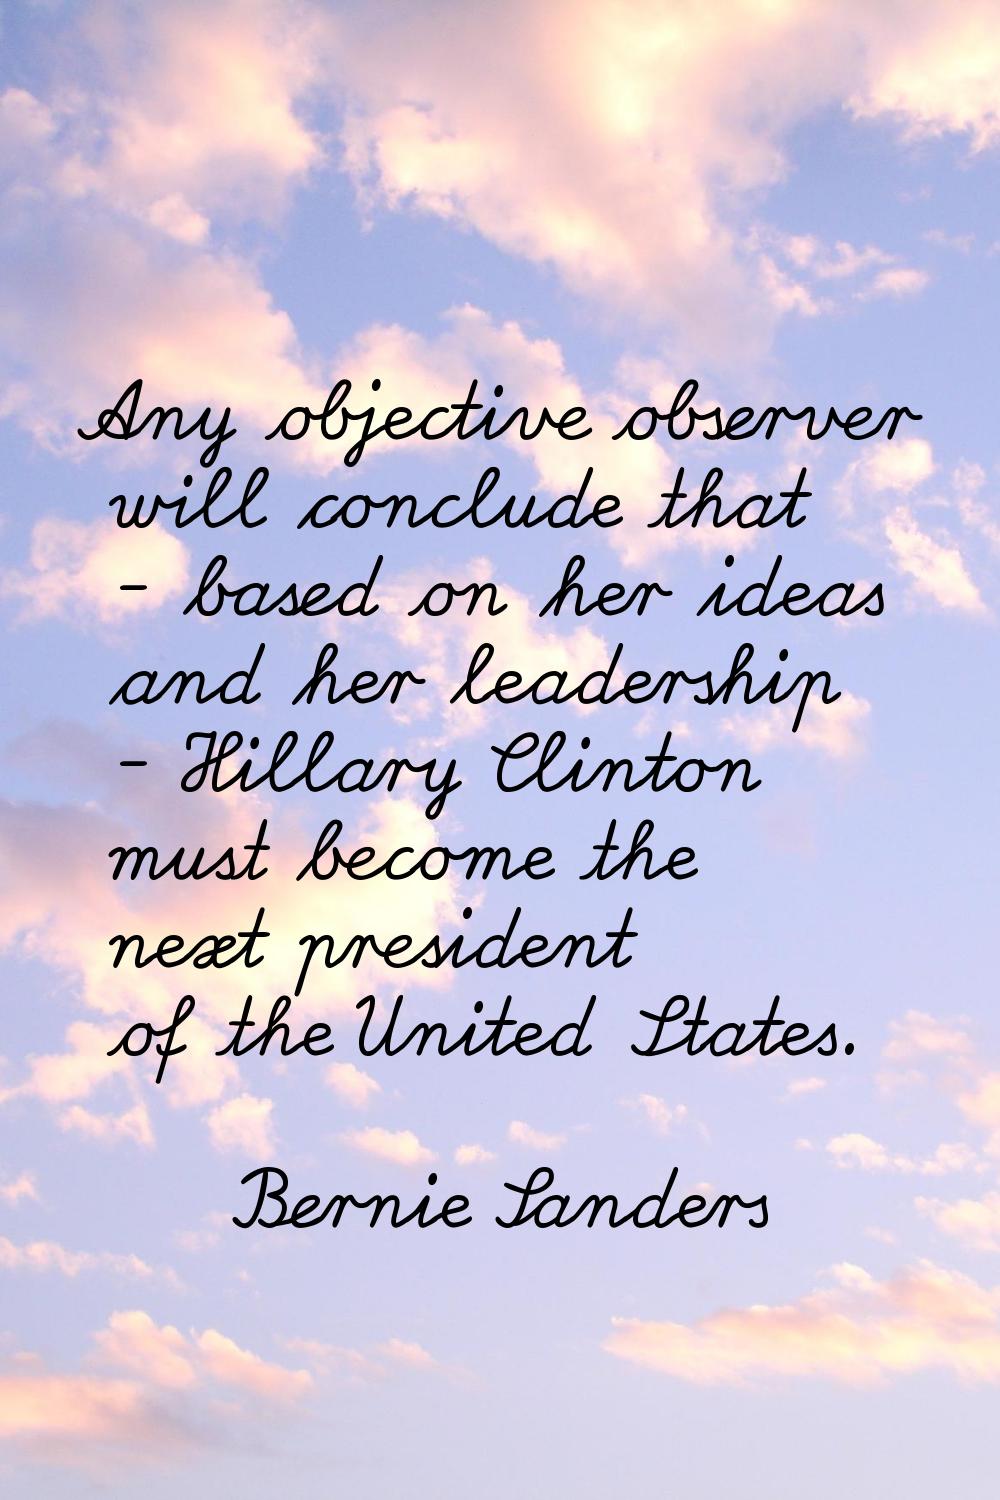 Any objective observer will conclude that - based on her ideas and her leadership - Hillary Clinton